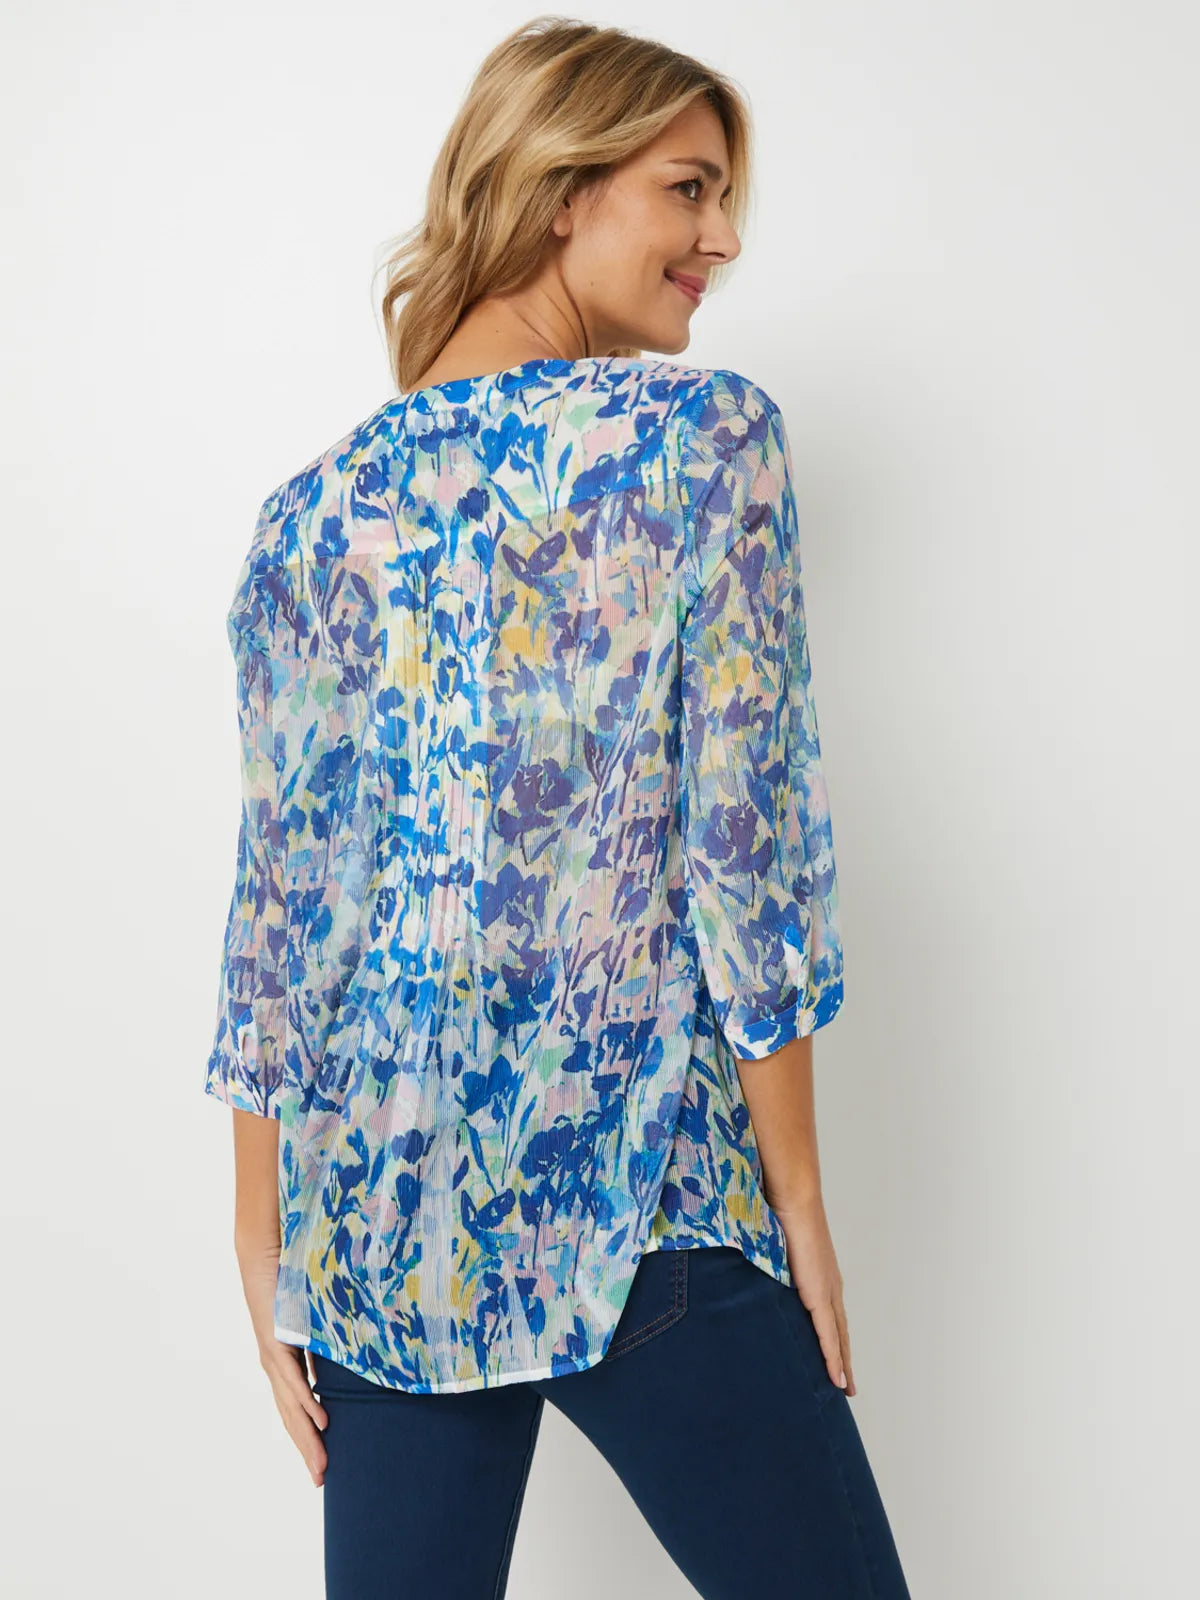 CHEMISE VOILE CH800 By JULIE GUERLANDE